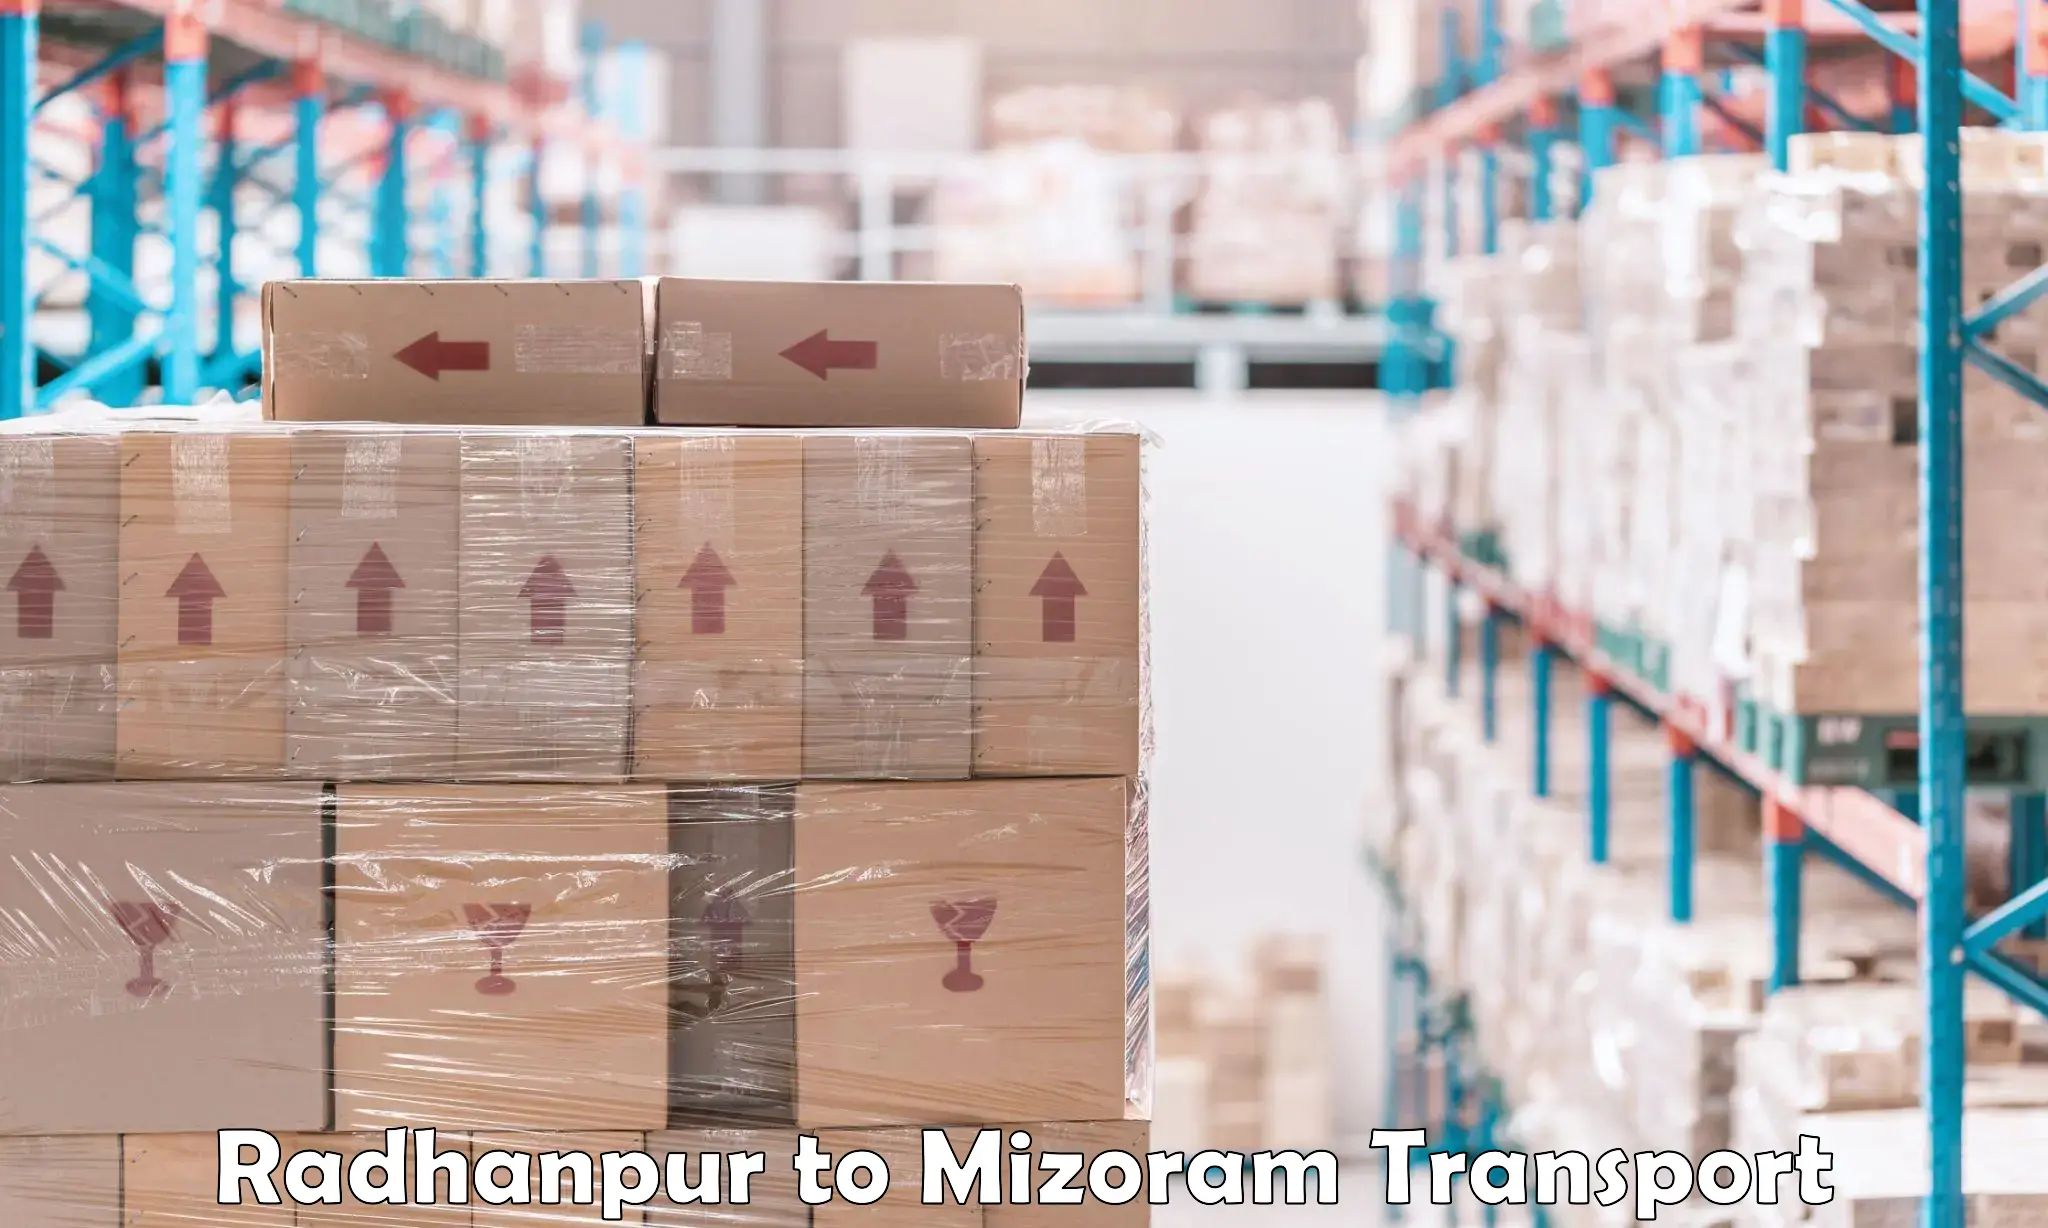 Container transport service Radhanpur to Aizawl